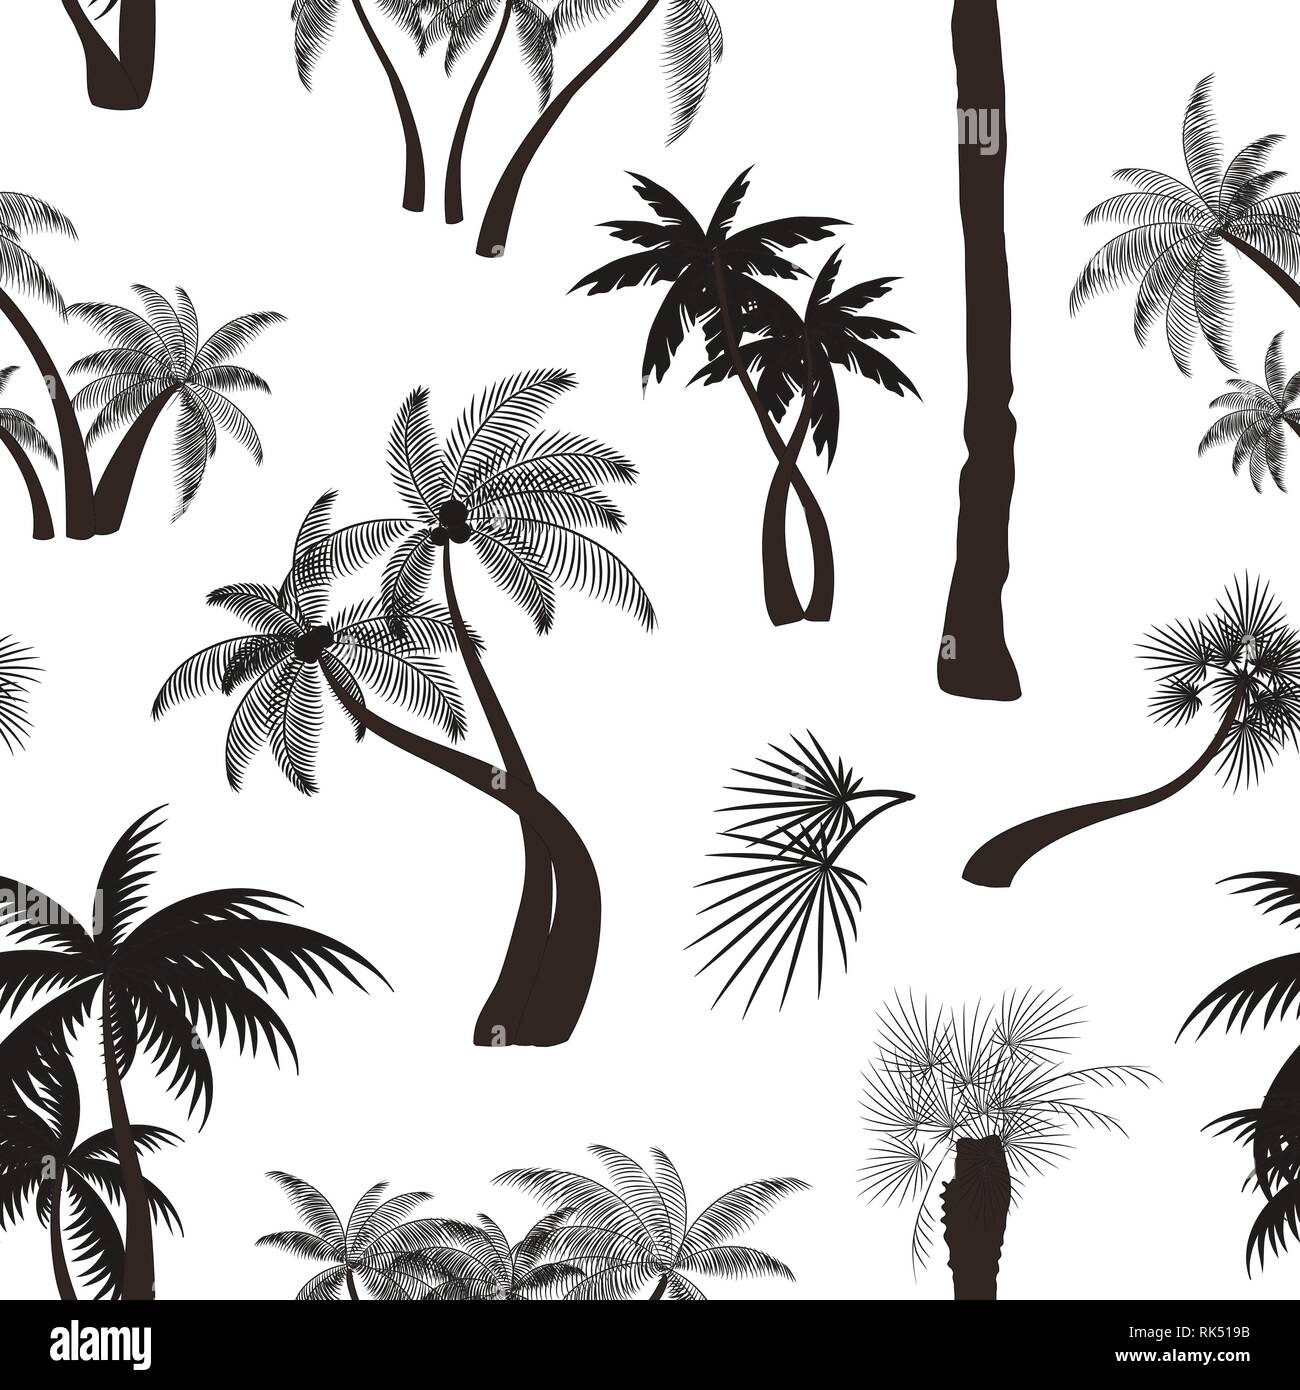 Palm collection pattern. Vector illustration EPS 10 Stock Vector